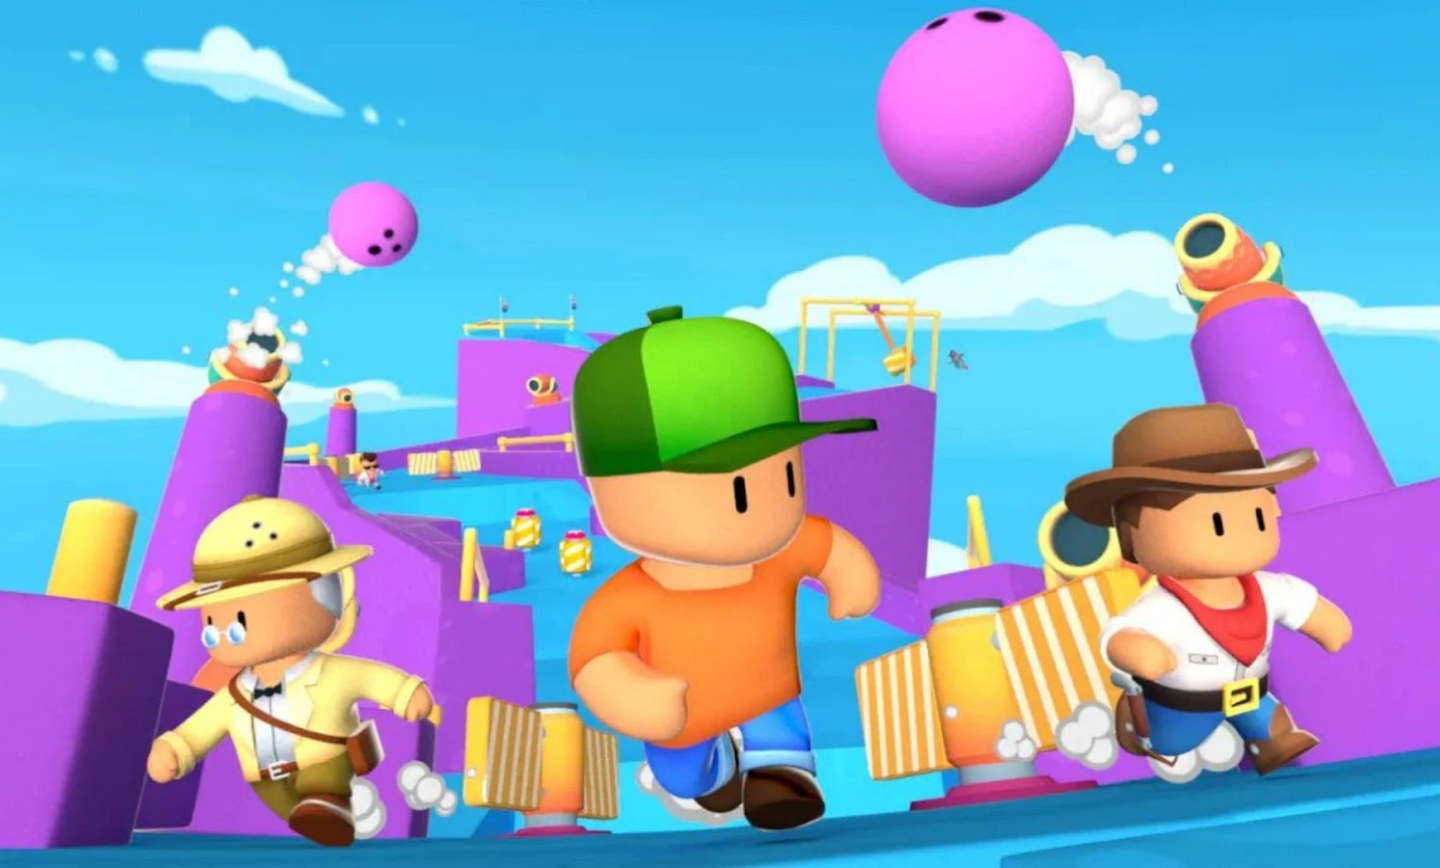 Stumble Guys Coming To Consoles; Beta, Cross-Play, And Cross-Progression  Confirmed - GameSpot